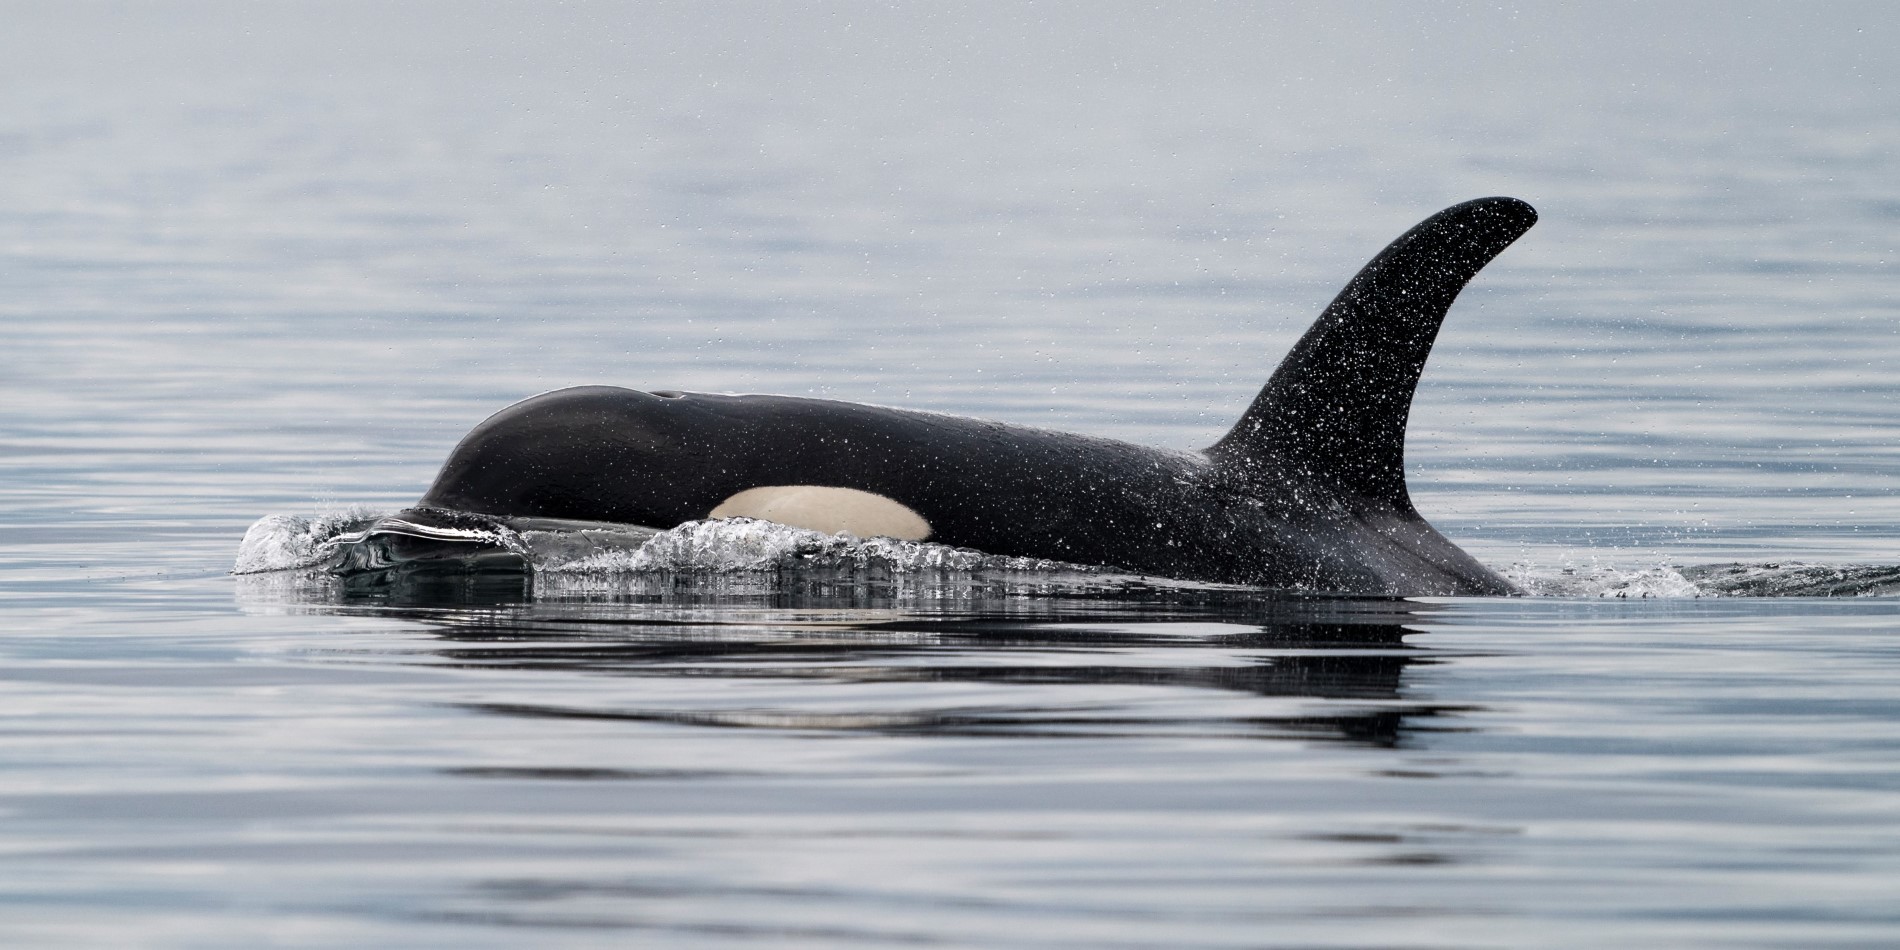 An orca on the surface of the water